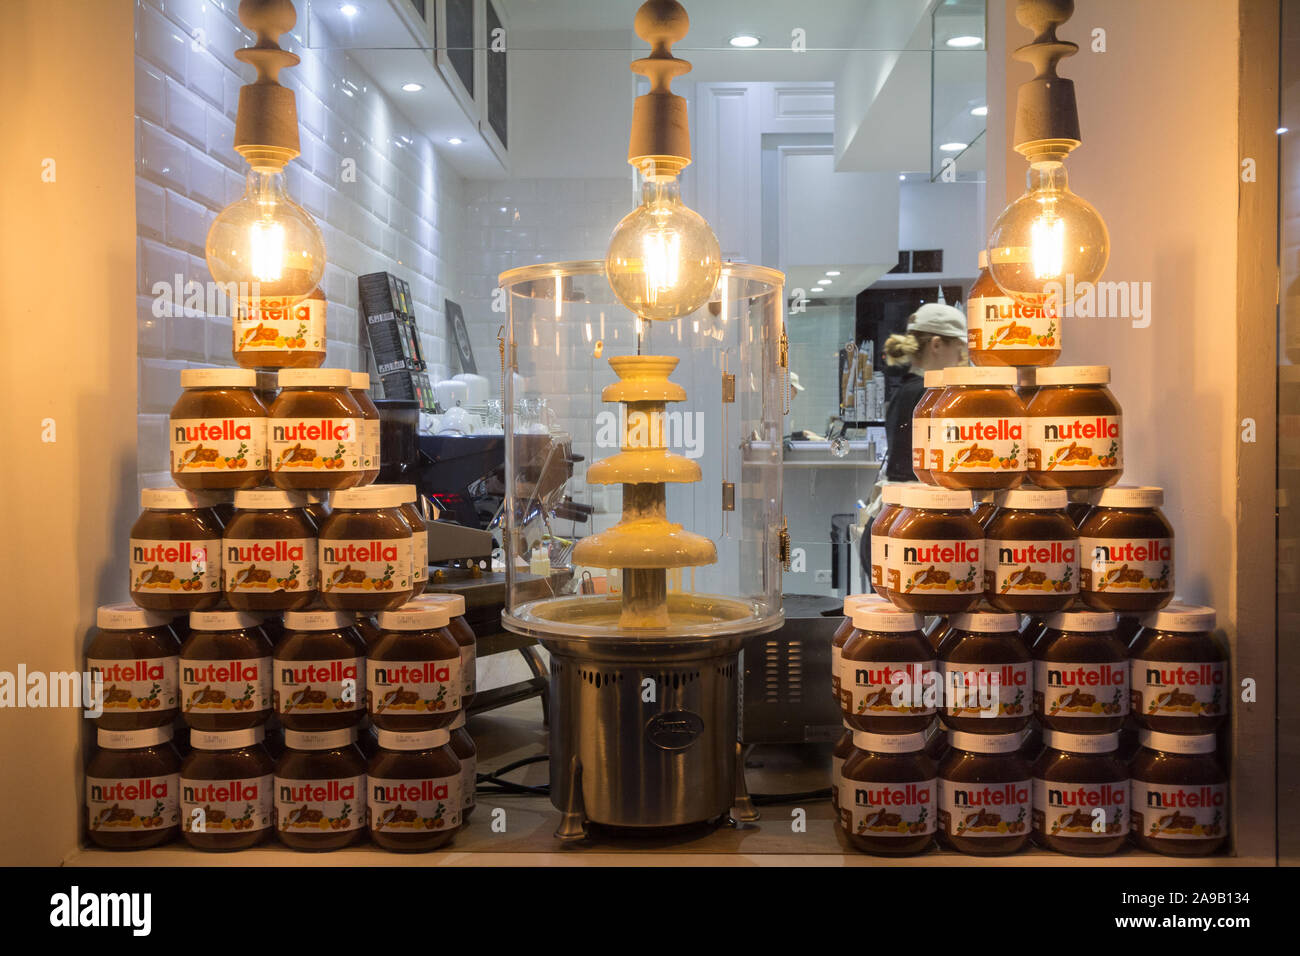 VIENNA, AUSTRIA - NOVEMBER 6, 2019: Nutella Jars piled with their logo on display in a retailer in Vienna. Nutella is a hazelnut and cocoa spread prod Stock Photo